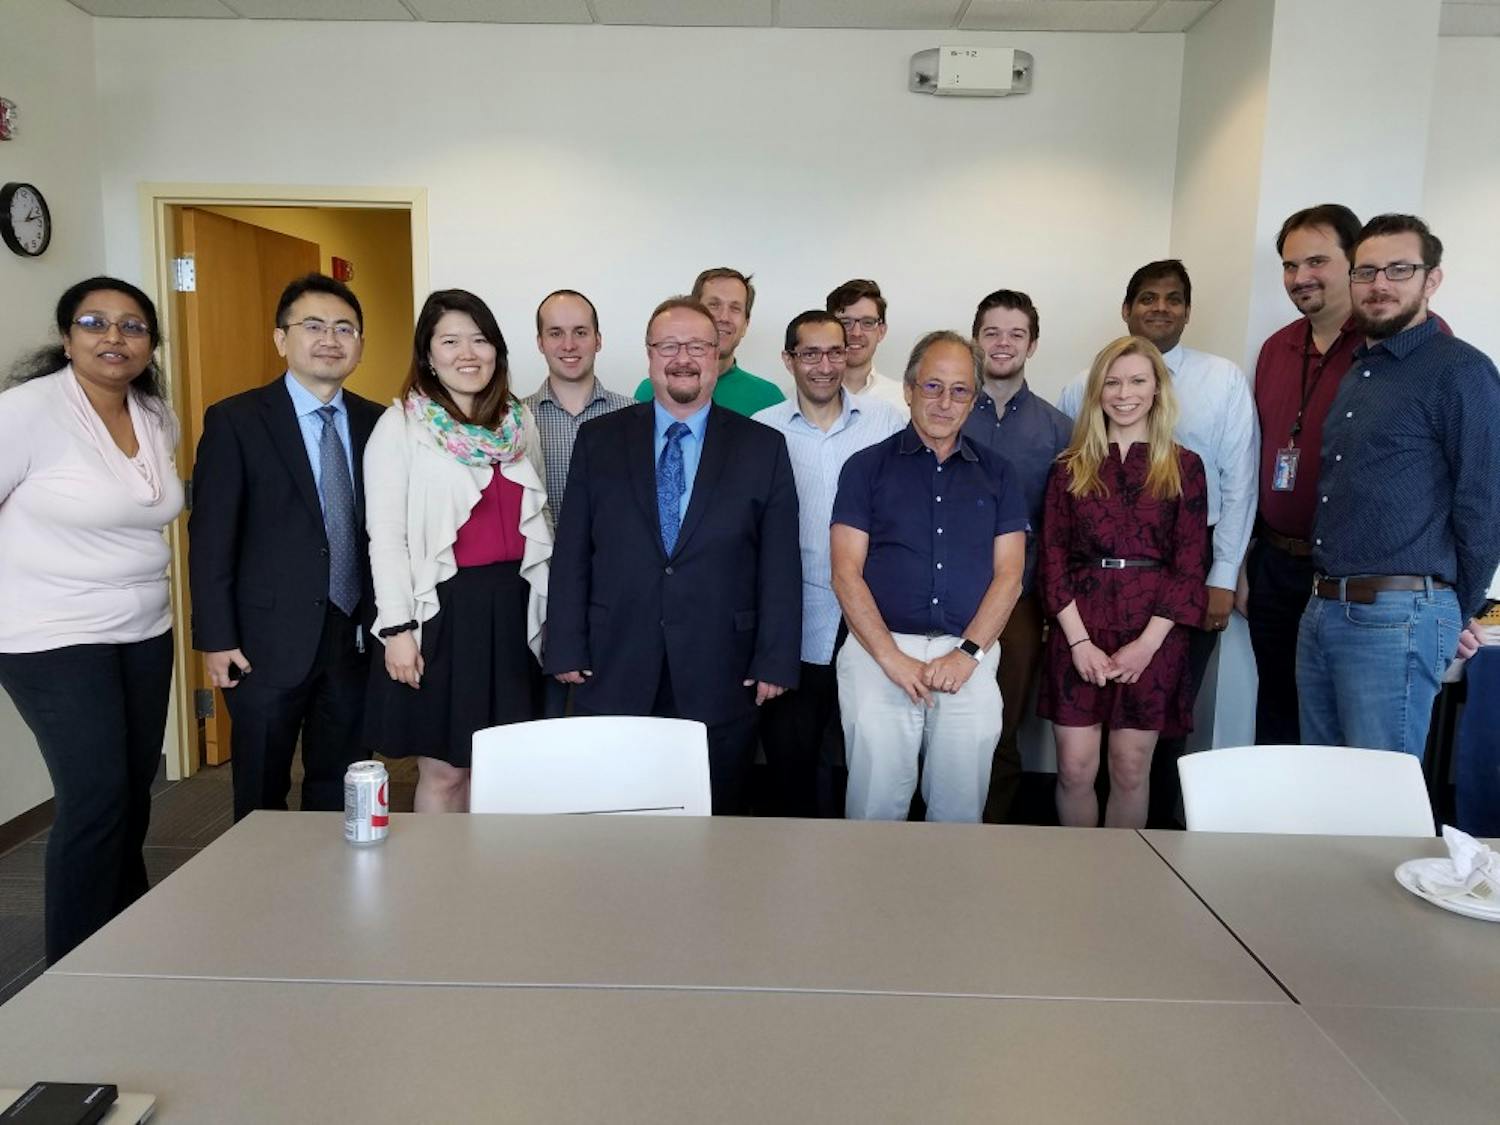 Dr. Peter Elkin (fifth from left) and Ph.D. students meet with Nobel Laureate and biophysicist Michael Levitt.